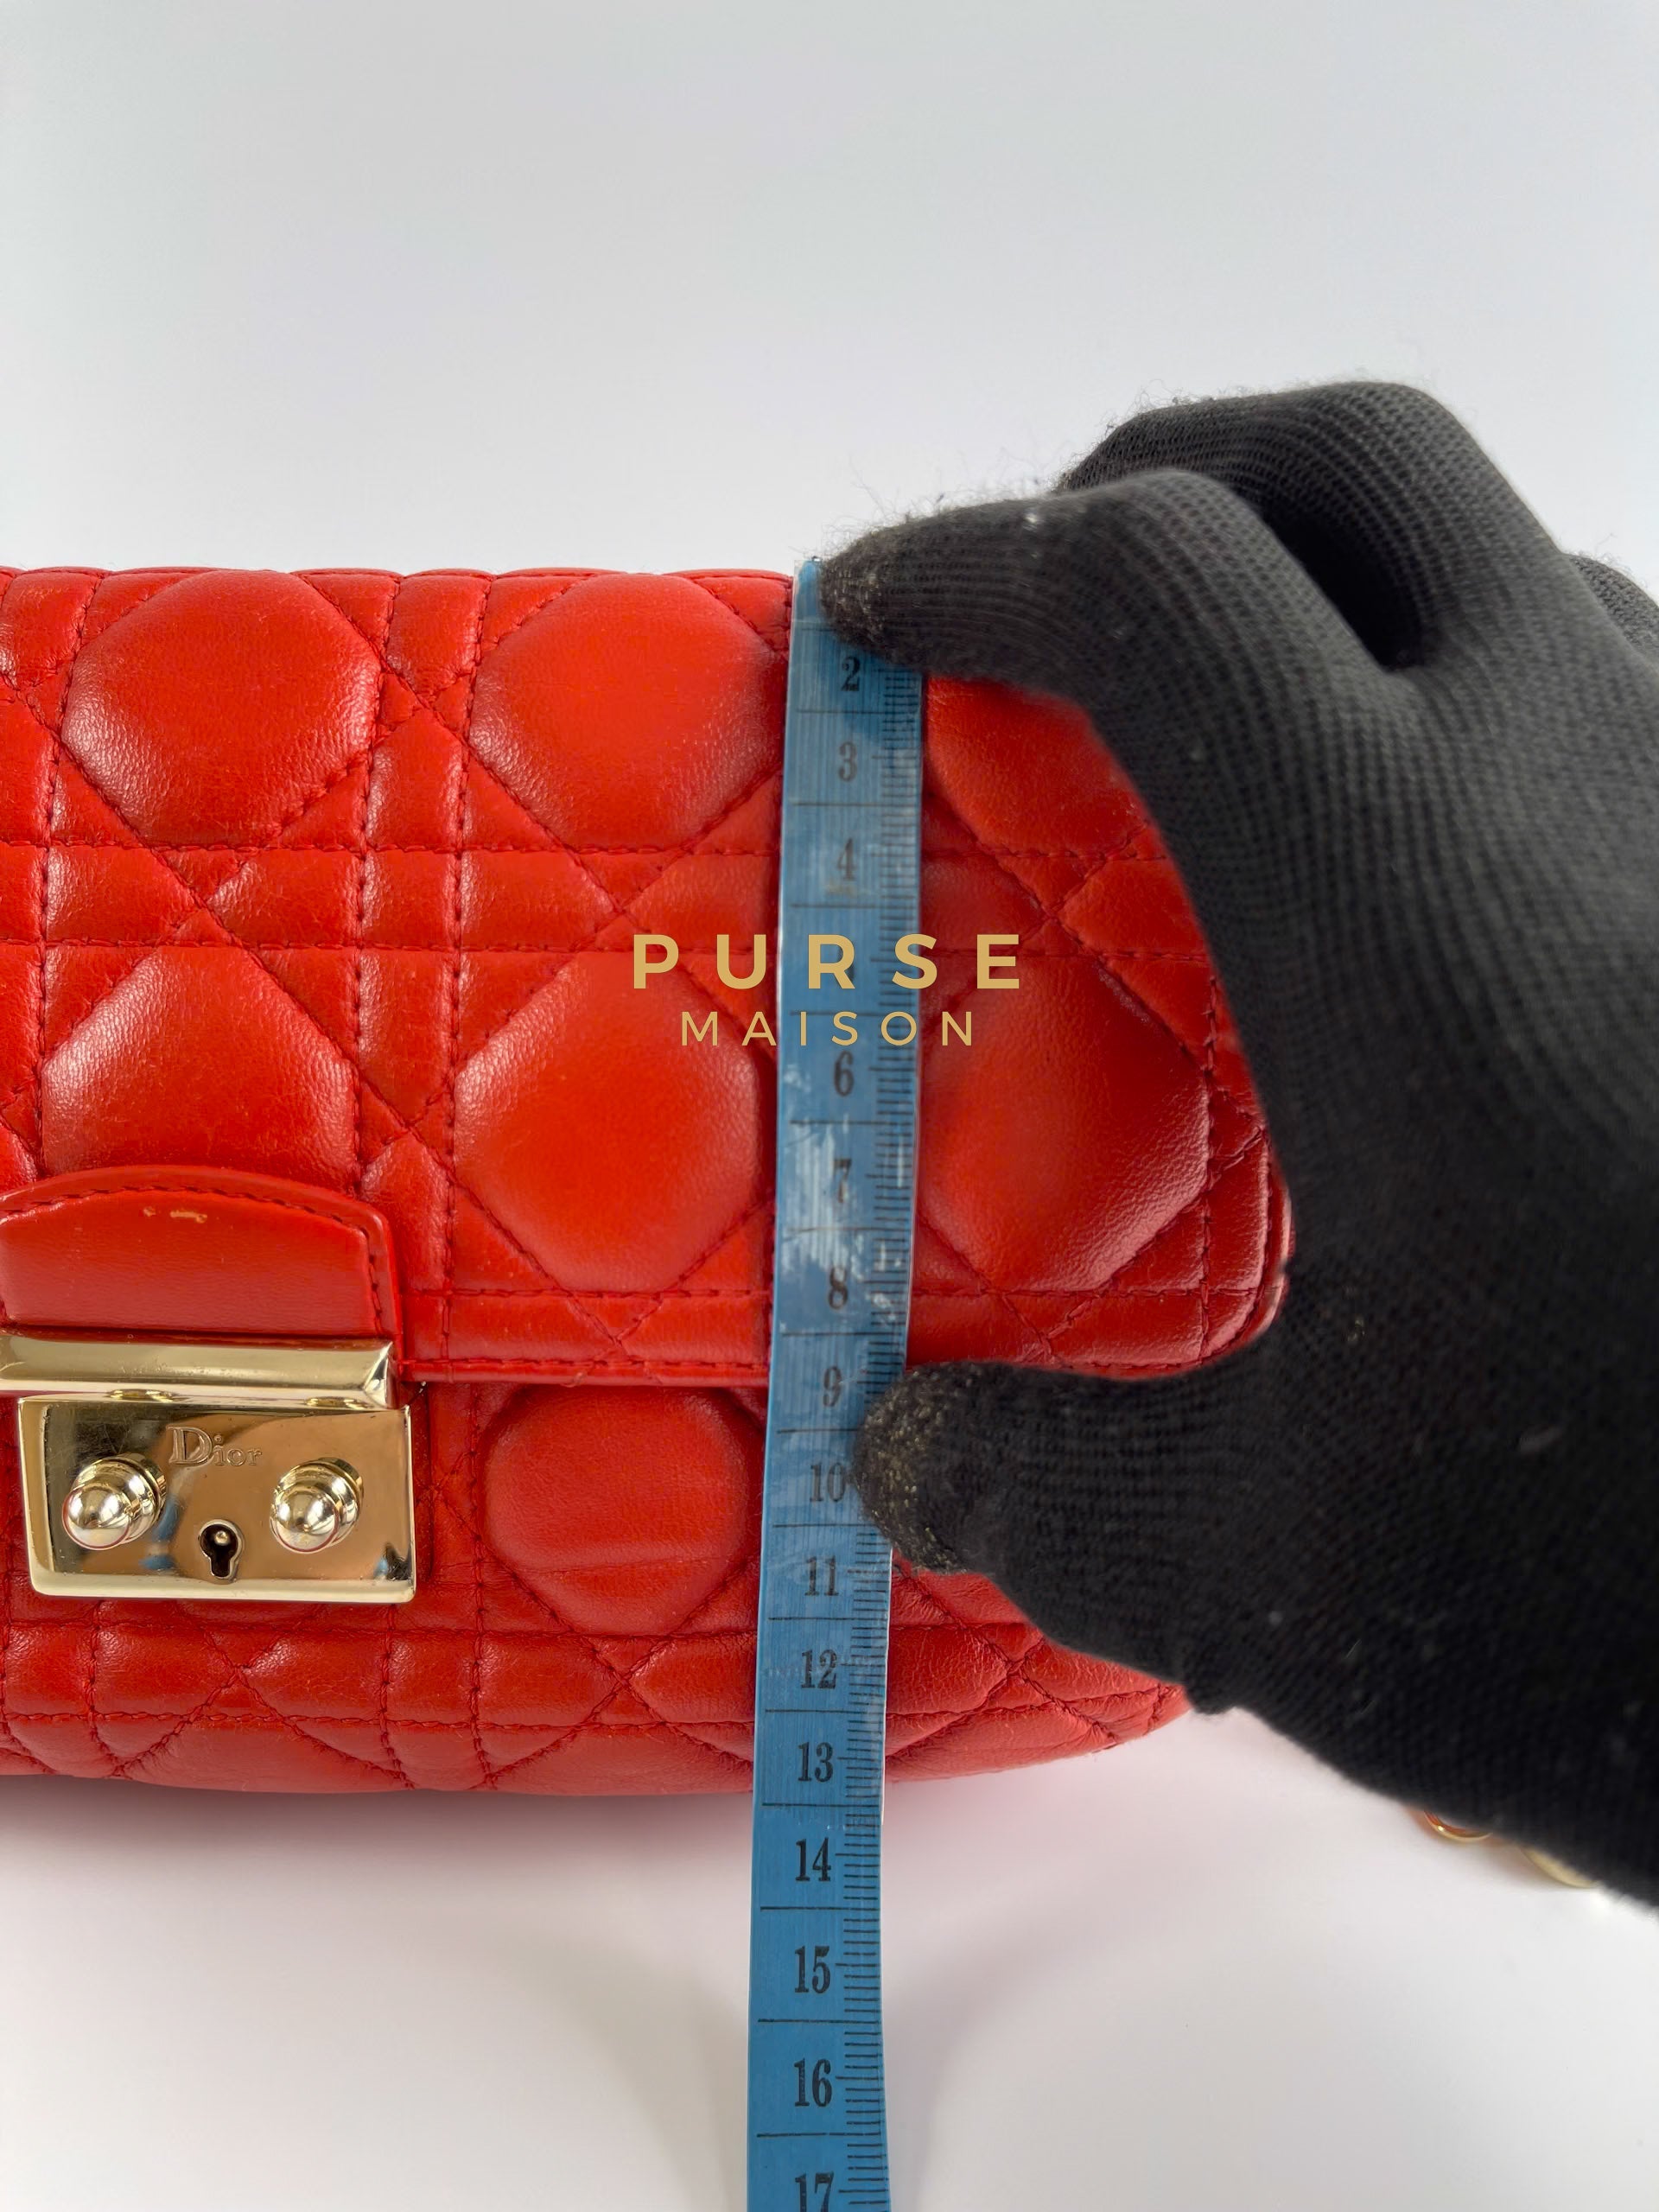 Miss Dior Promenade Bag in Red Cannage Quilt Lambskin | Purse Maison Luxury Bags Shop